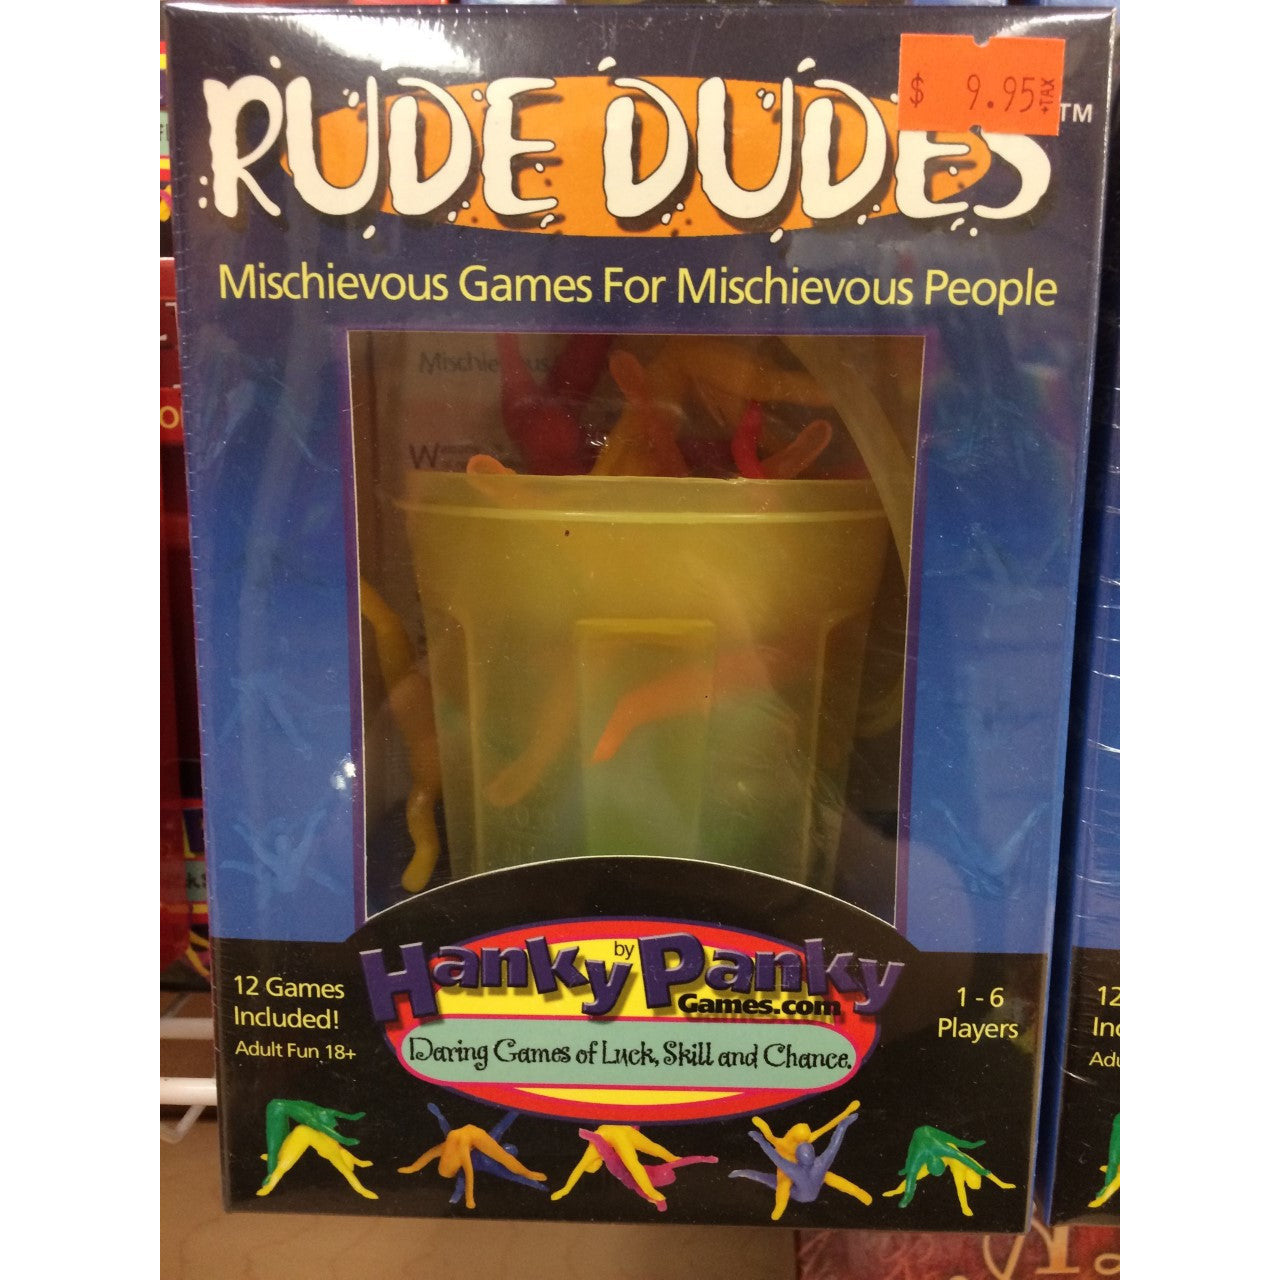 Rude Dudes Game by Hanky Panky